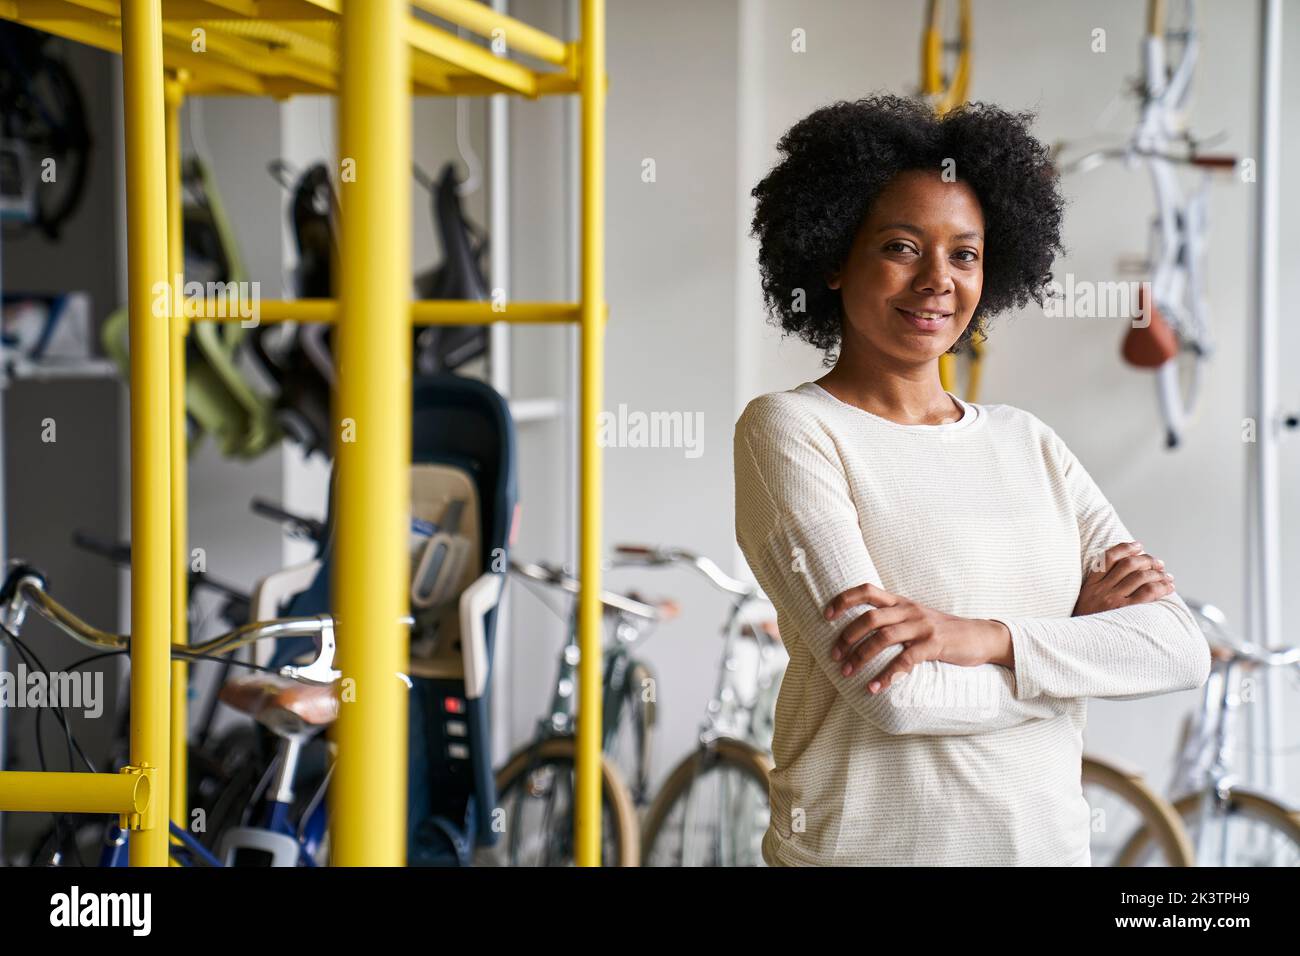 Mid-shot portrait of female African-American bicycle shop owner Stock Photo